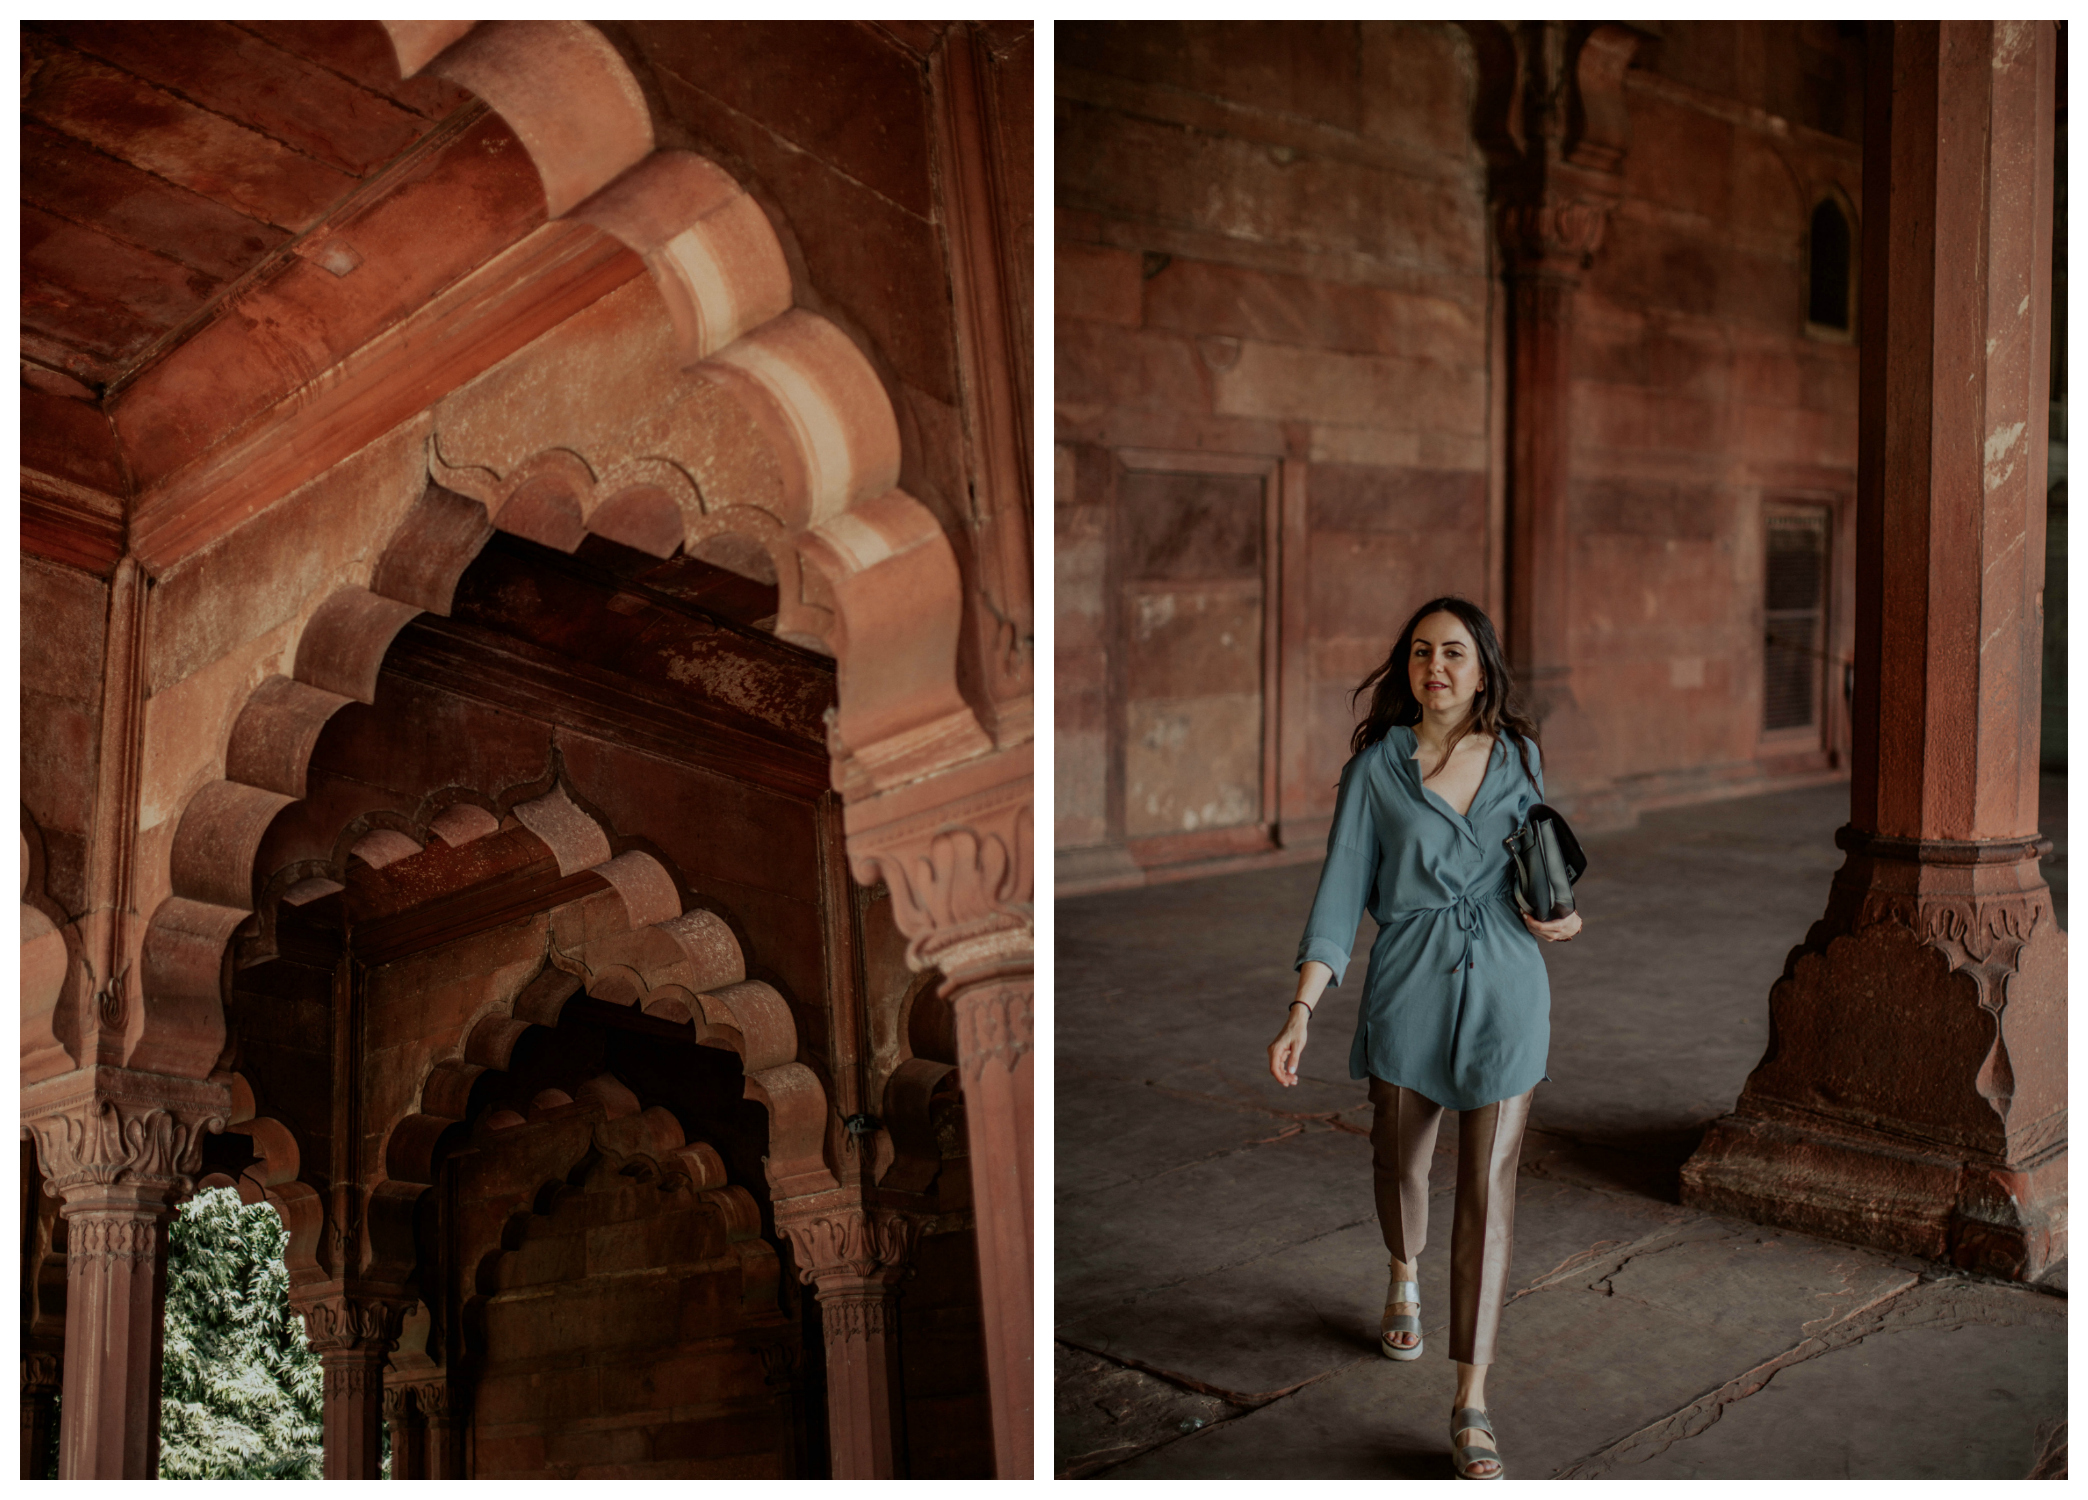 Yana Frigelis of NoMad Luxuries wearing metallic pants and a tunic in India and the lessons she learned traveling solo